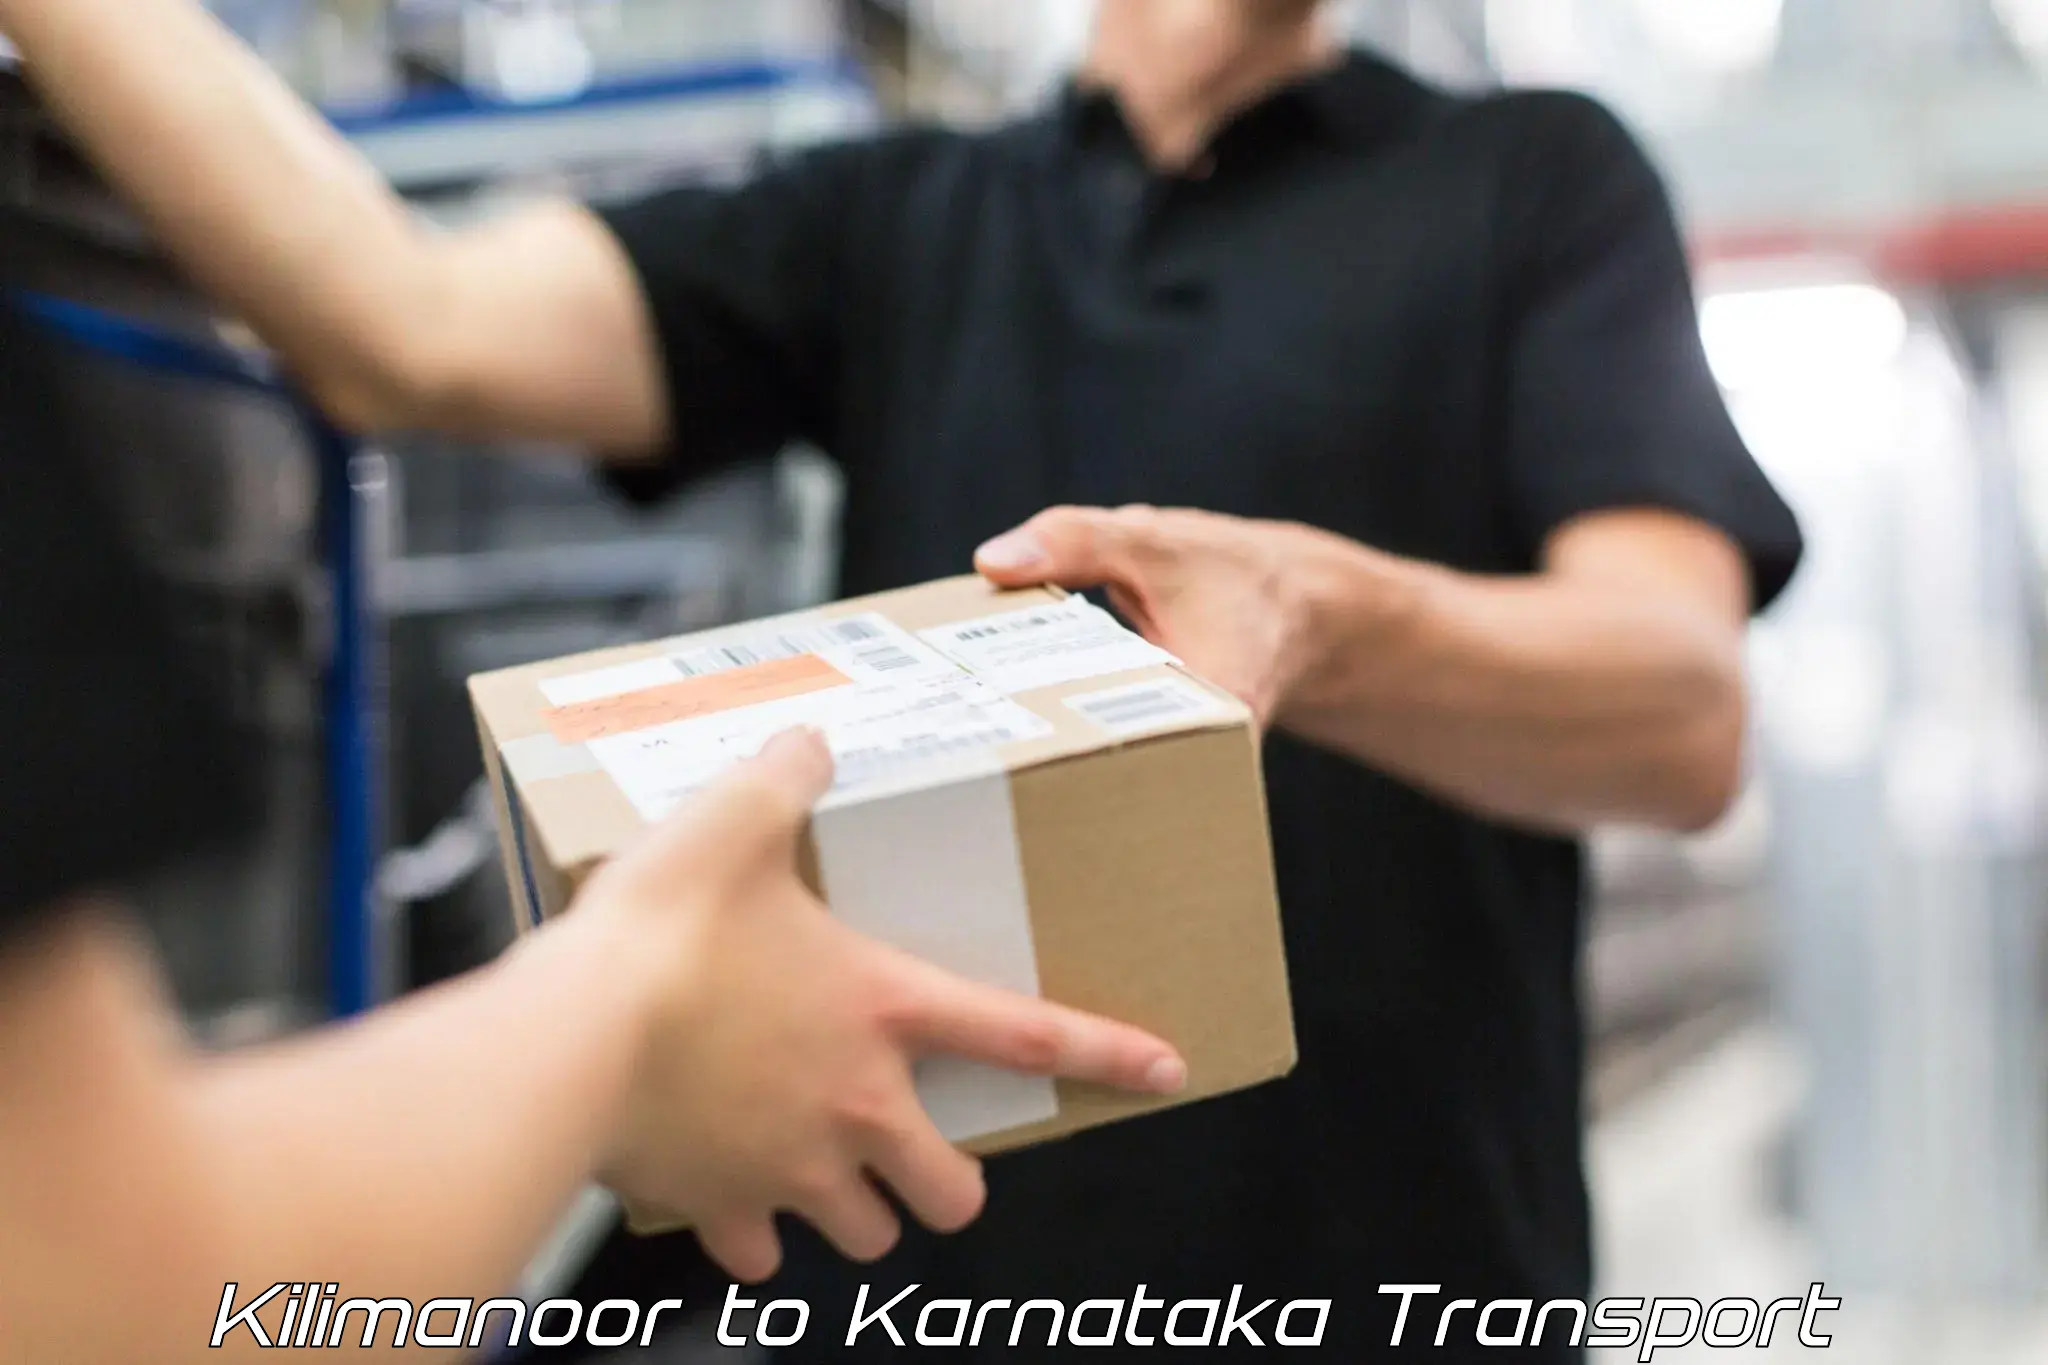 Daily parcel service transport Kilimanoor to Mangalore Port